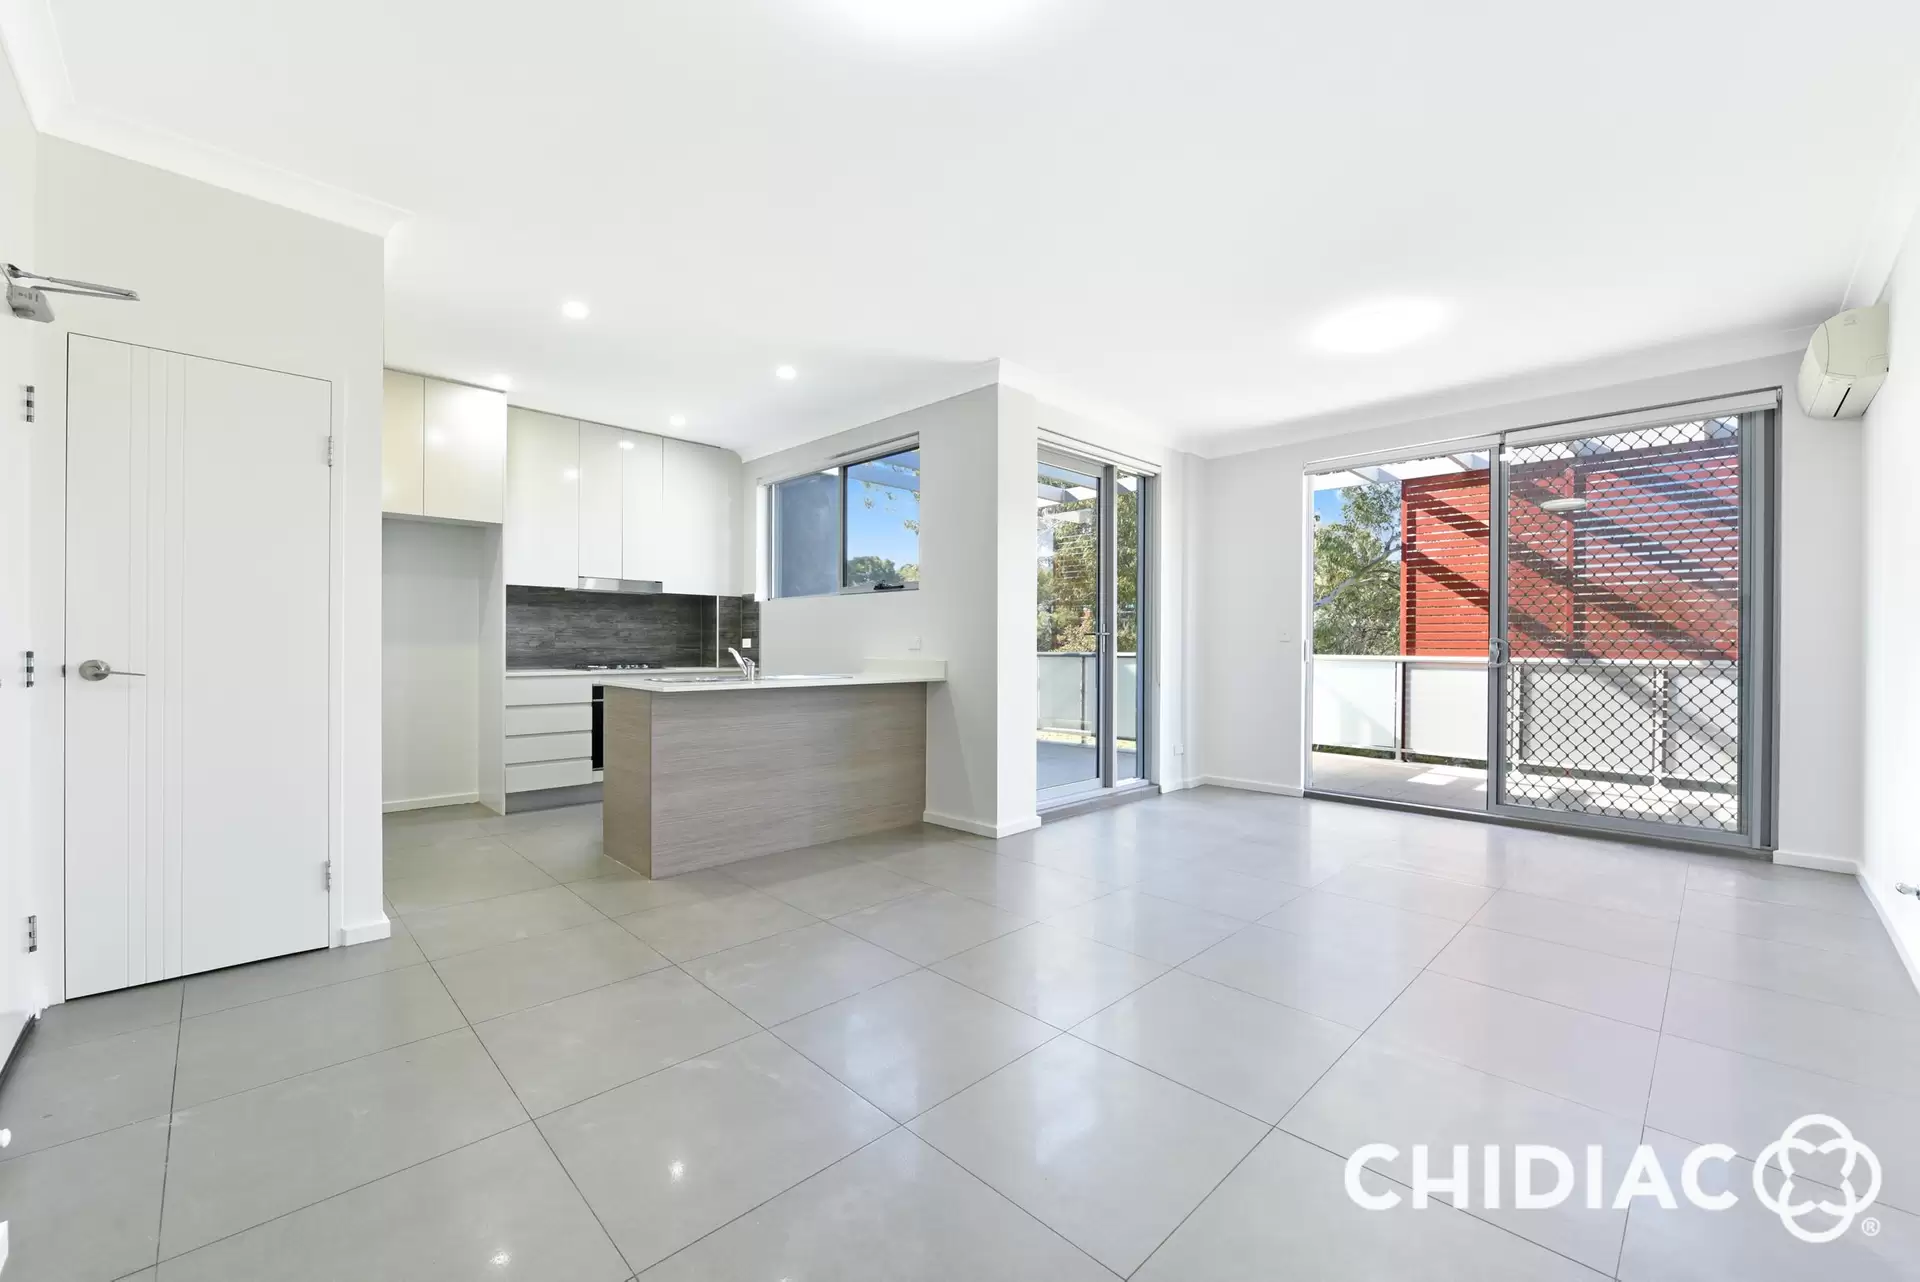 13/22 Burbang Crescent, Rydalmere Leased by Chidiac Realty - image 1